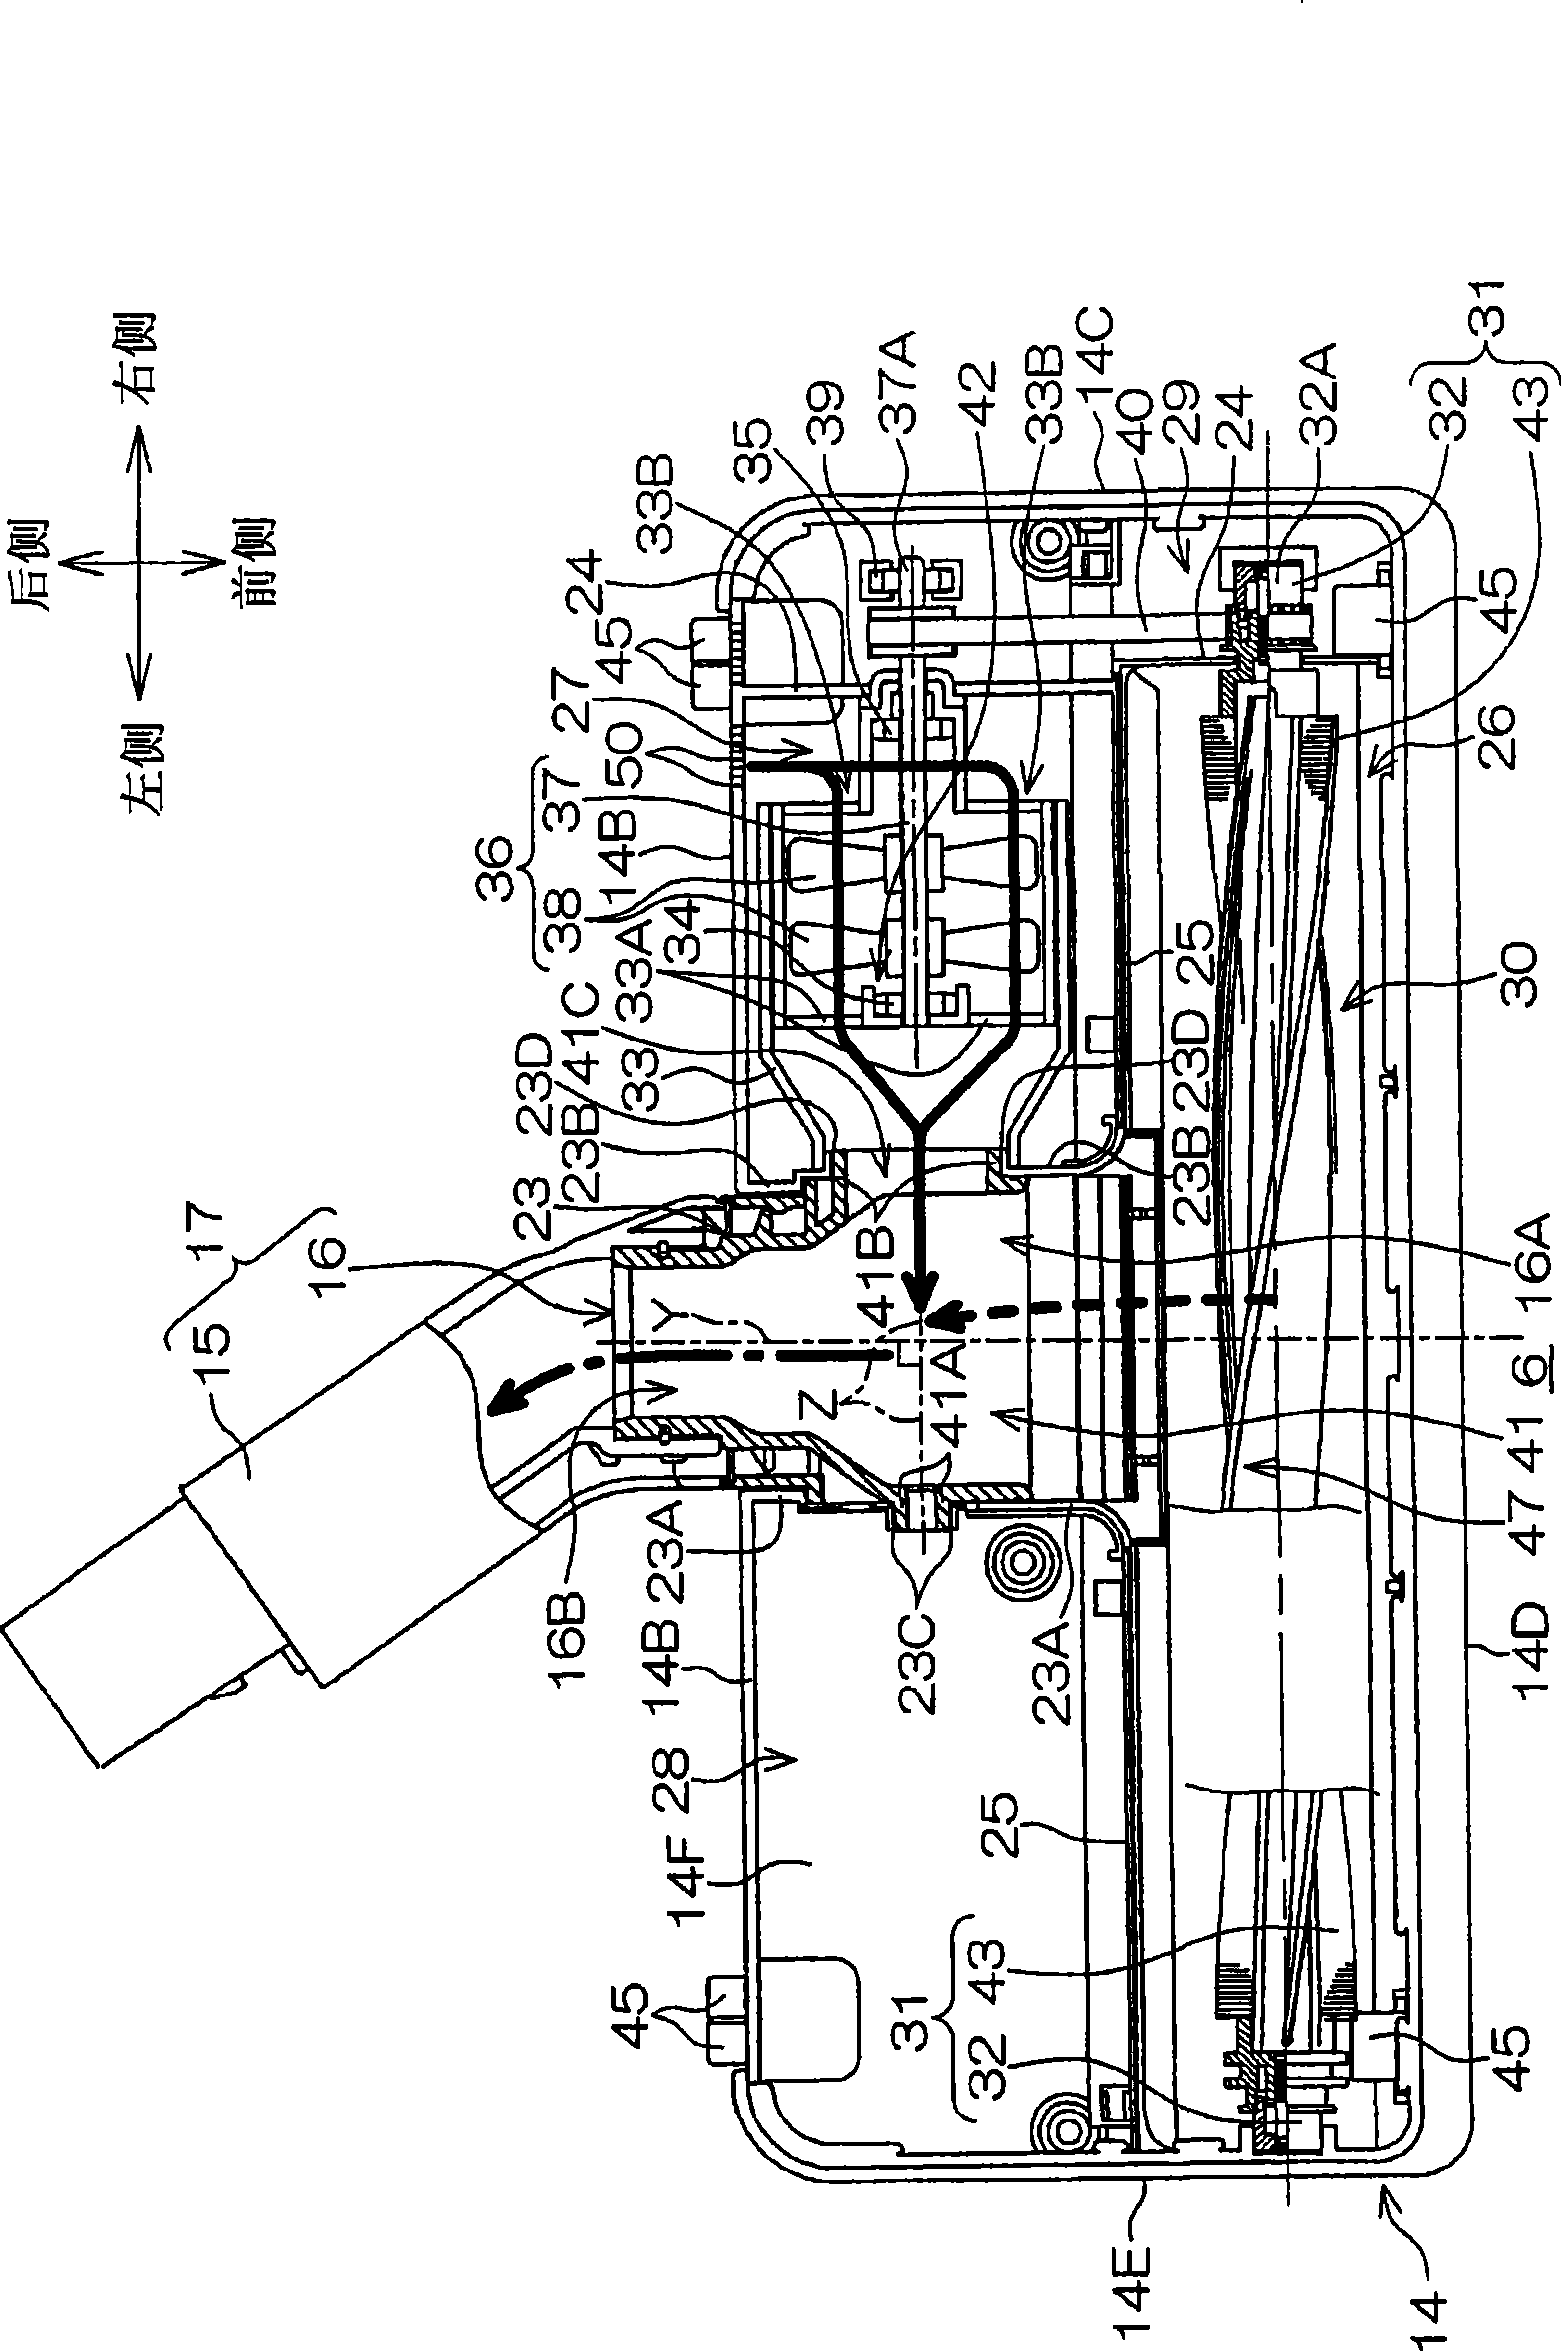 Inhalation device for electric dust collector